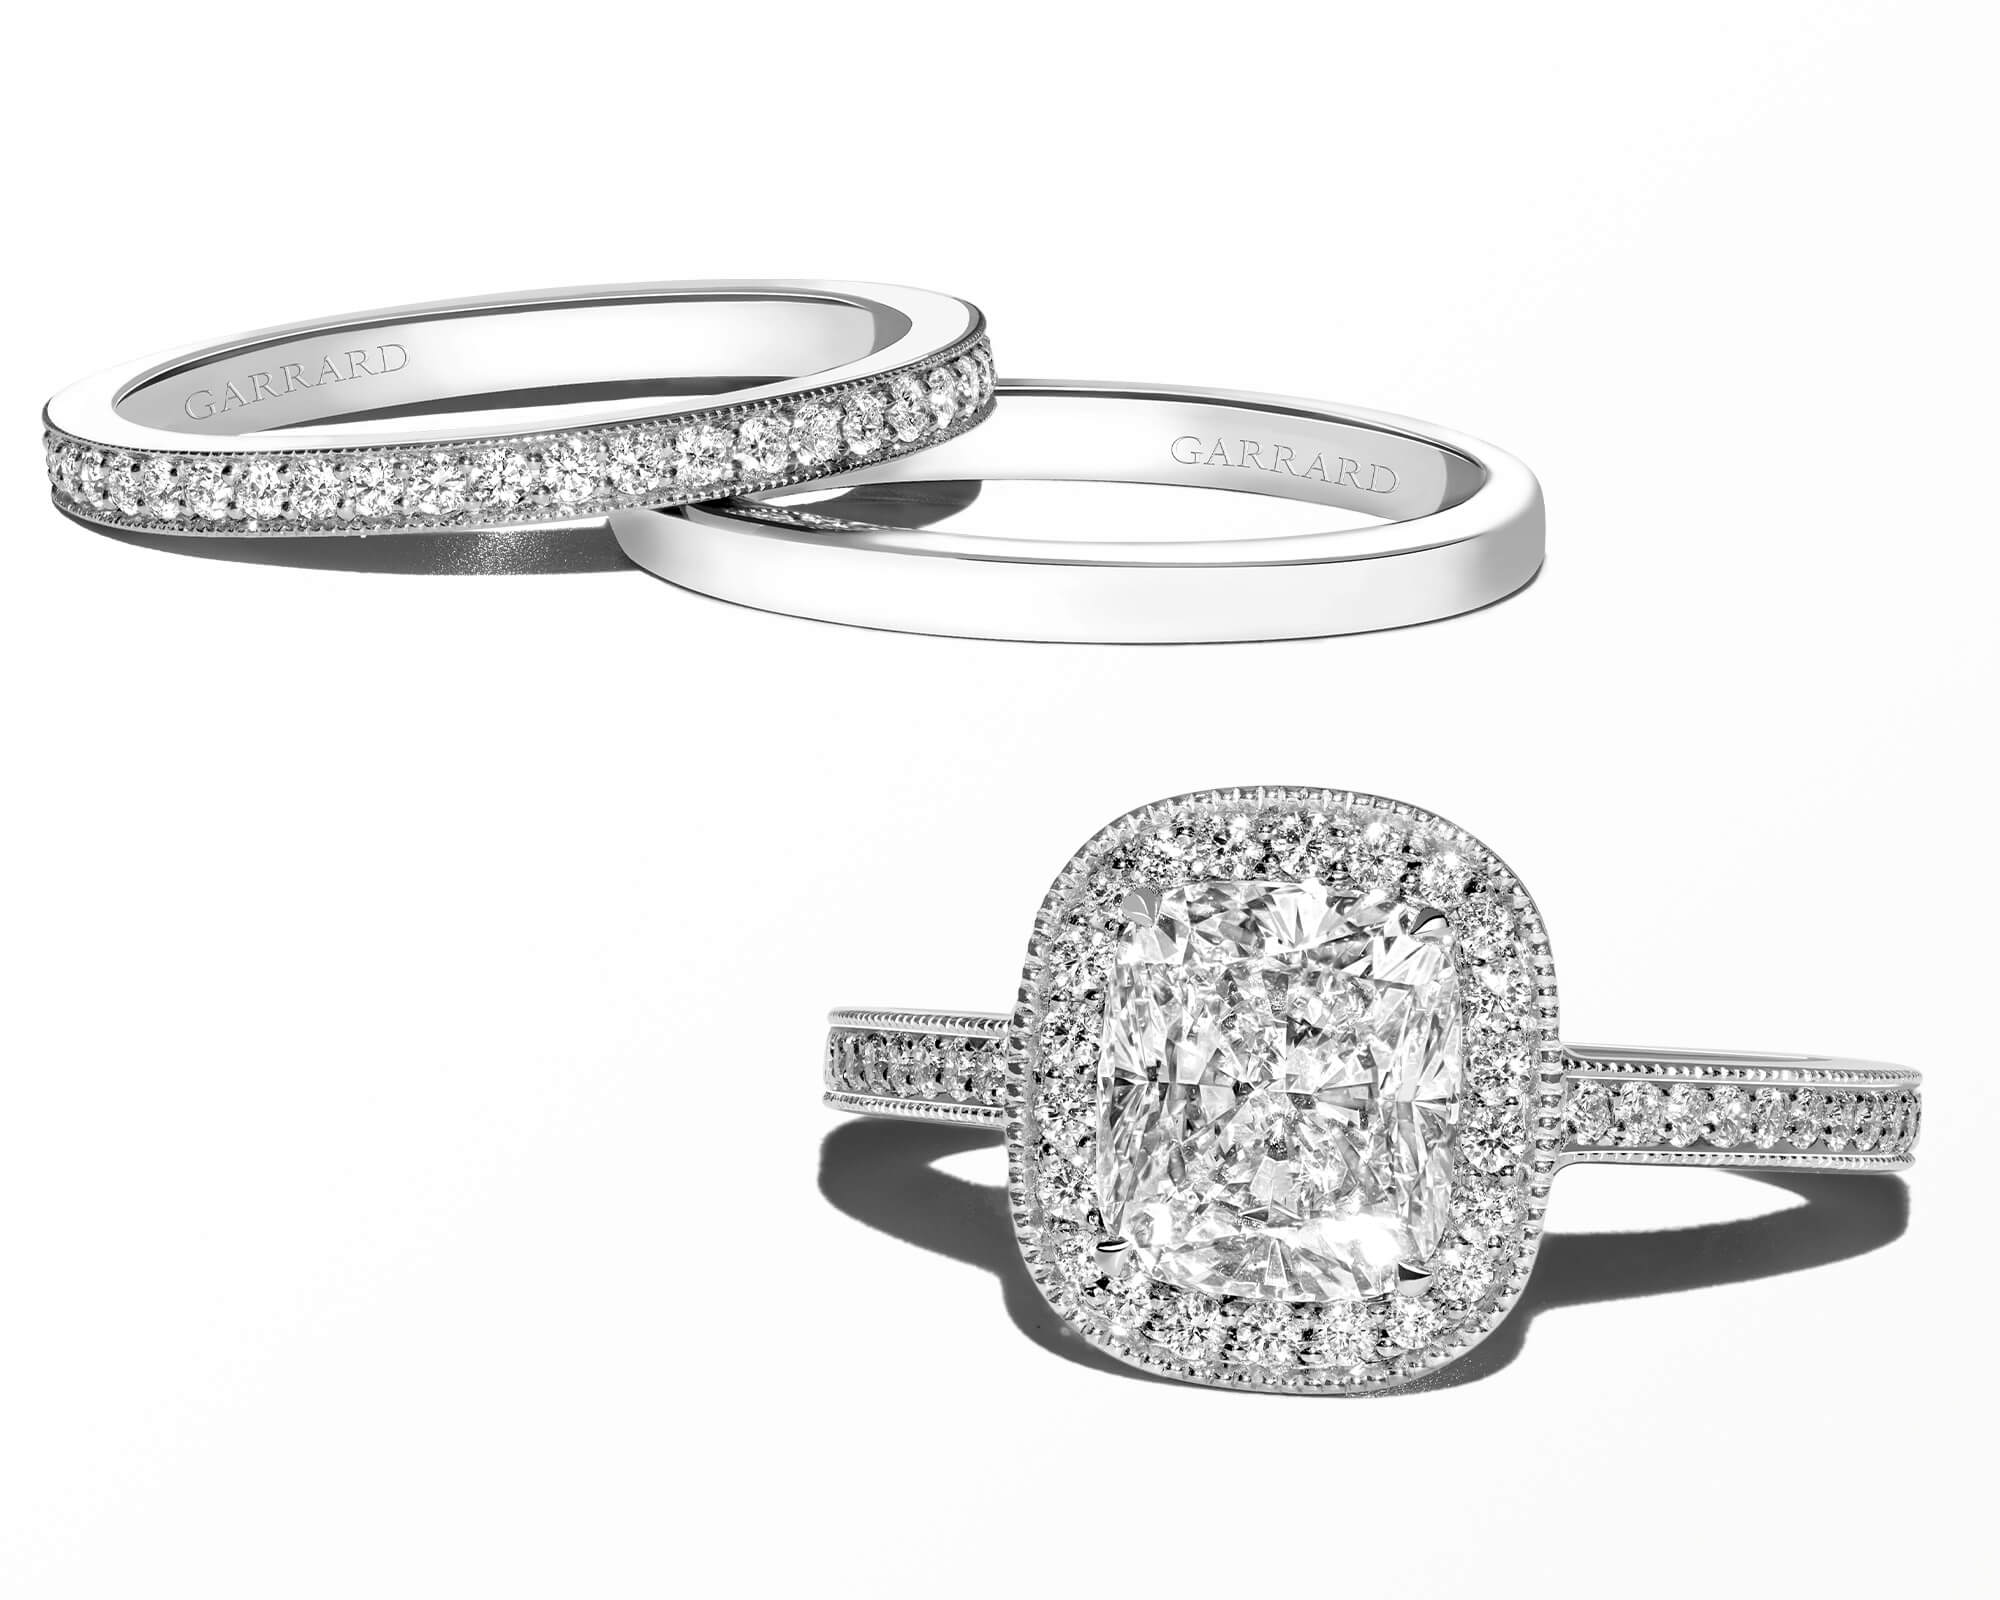 Garrard Evermore diamond engagement ring with an Evermore eternity ring and a plain wedding band